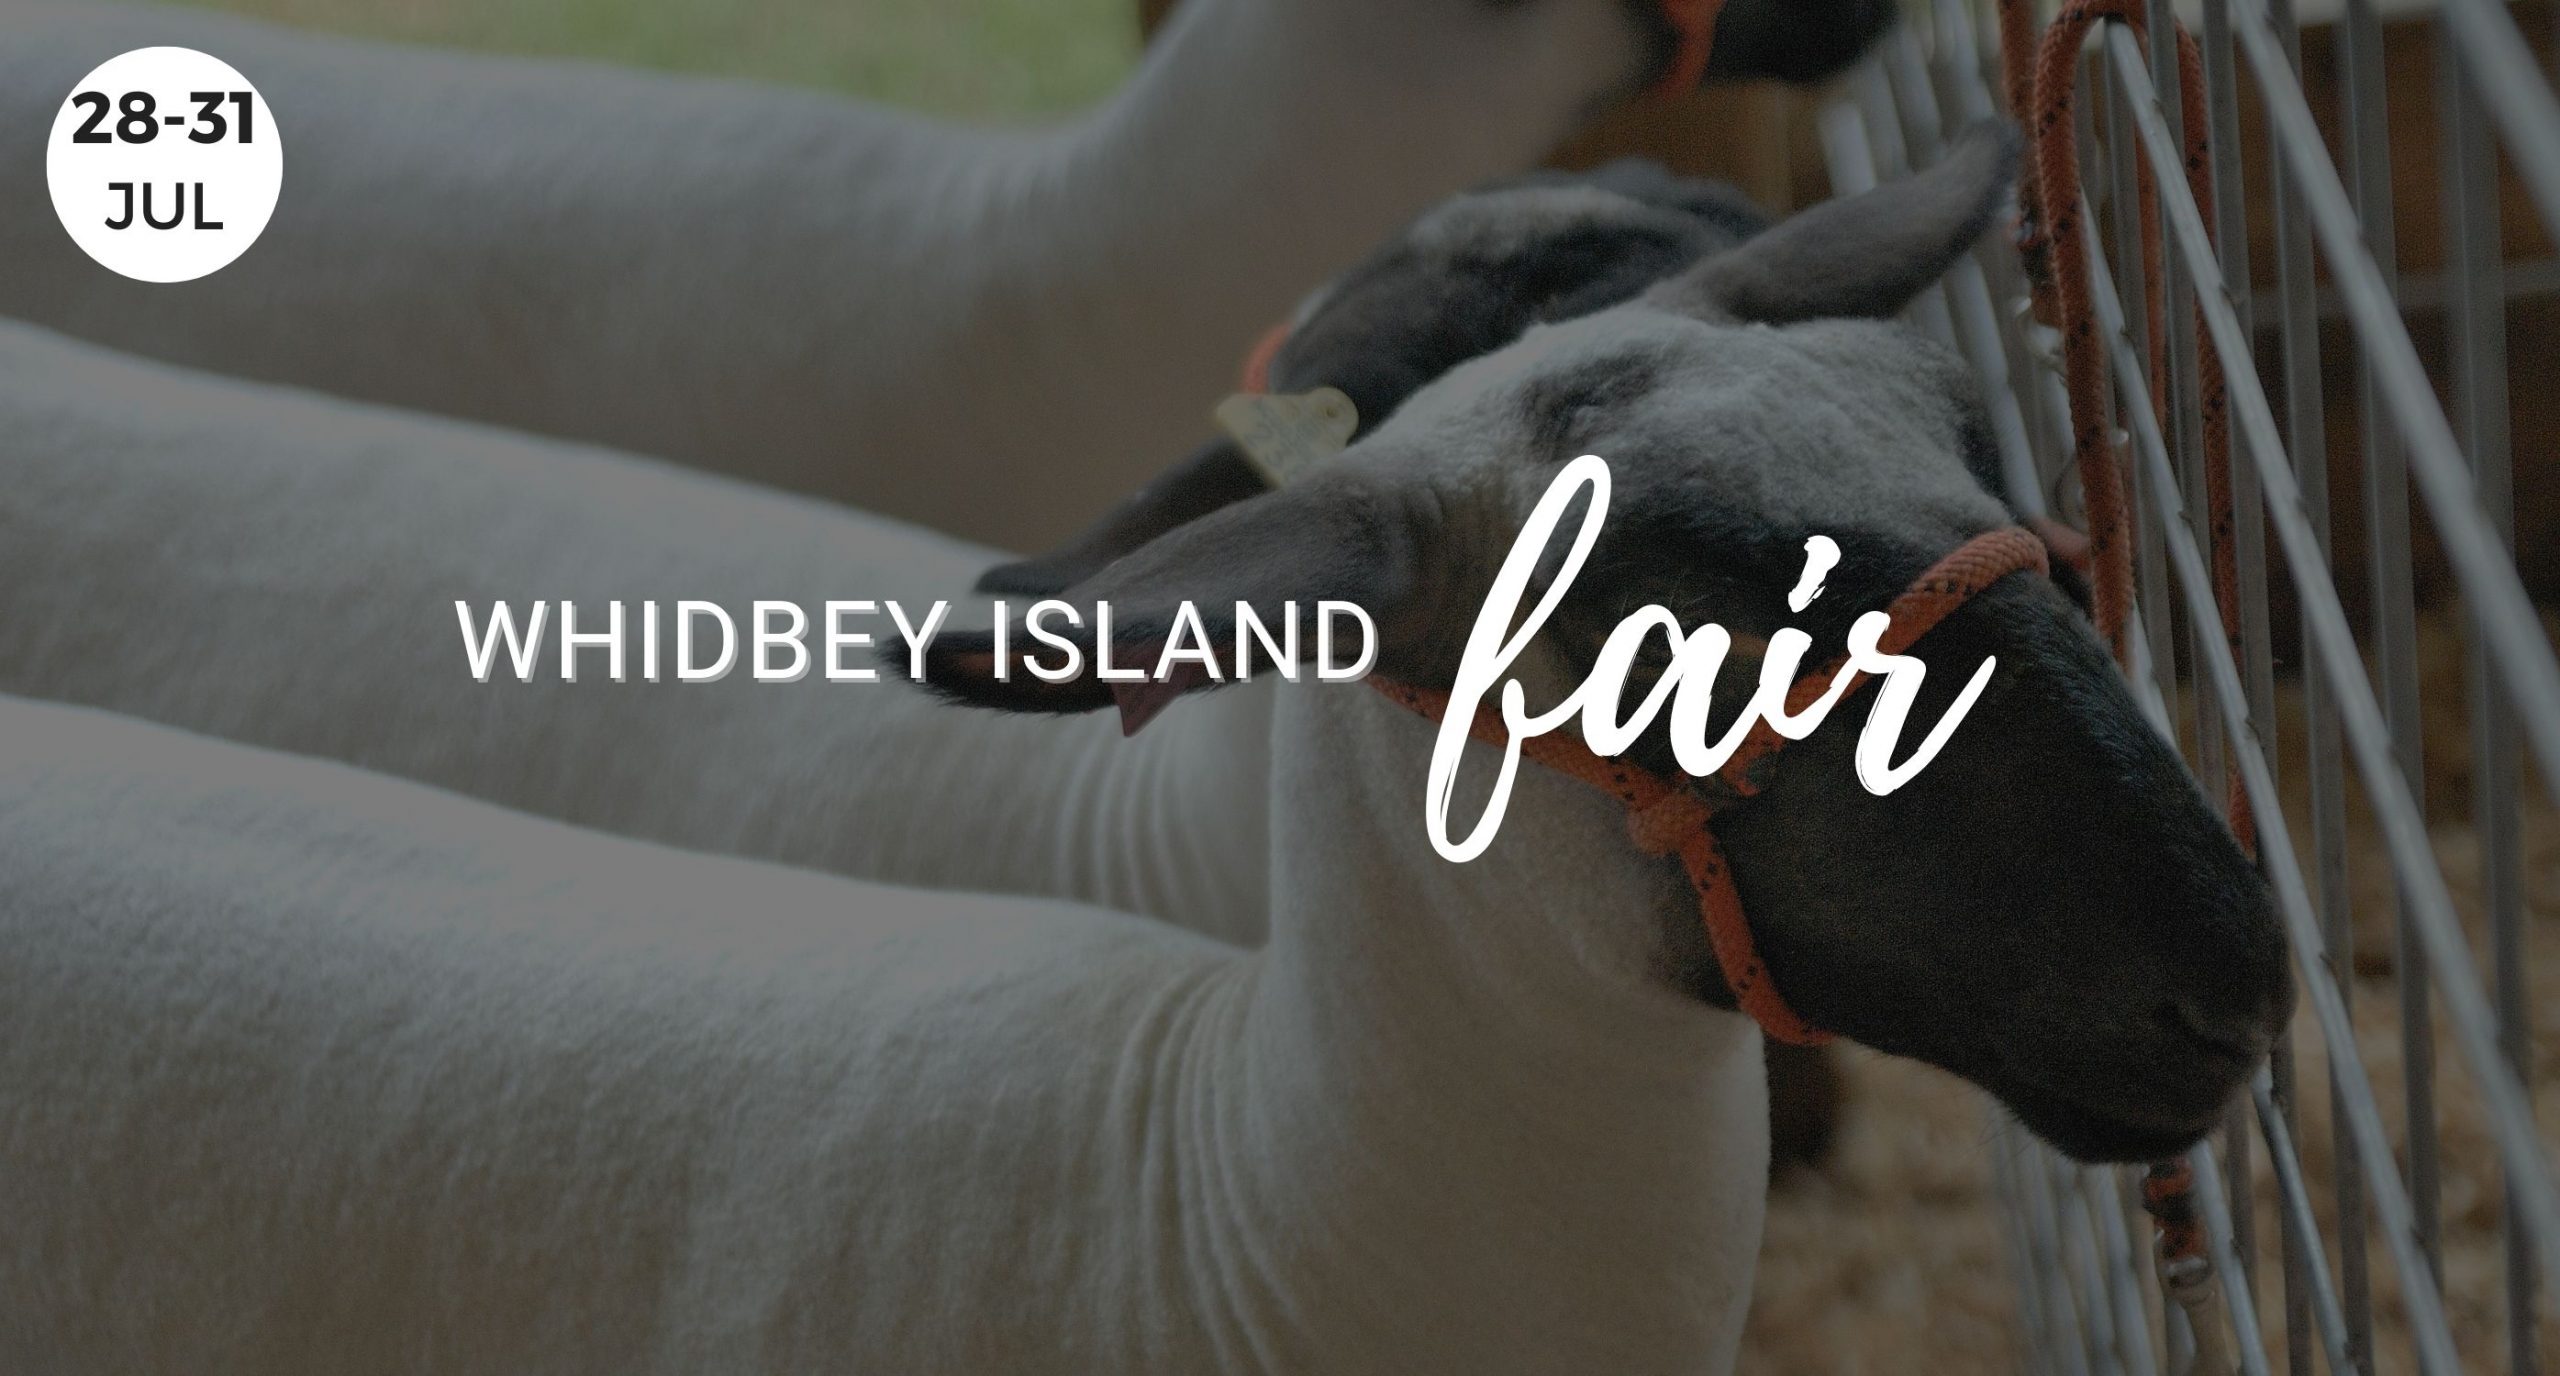 Whidbey Island Fair, Things to do Whidbey Island, Langley, South Whidbey, Fair, Animals, 4H, Festival, Summer 2022, Windermere